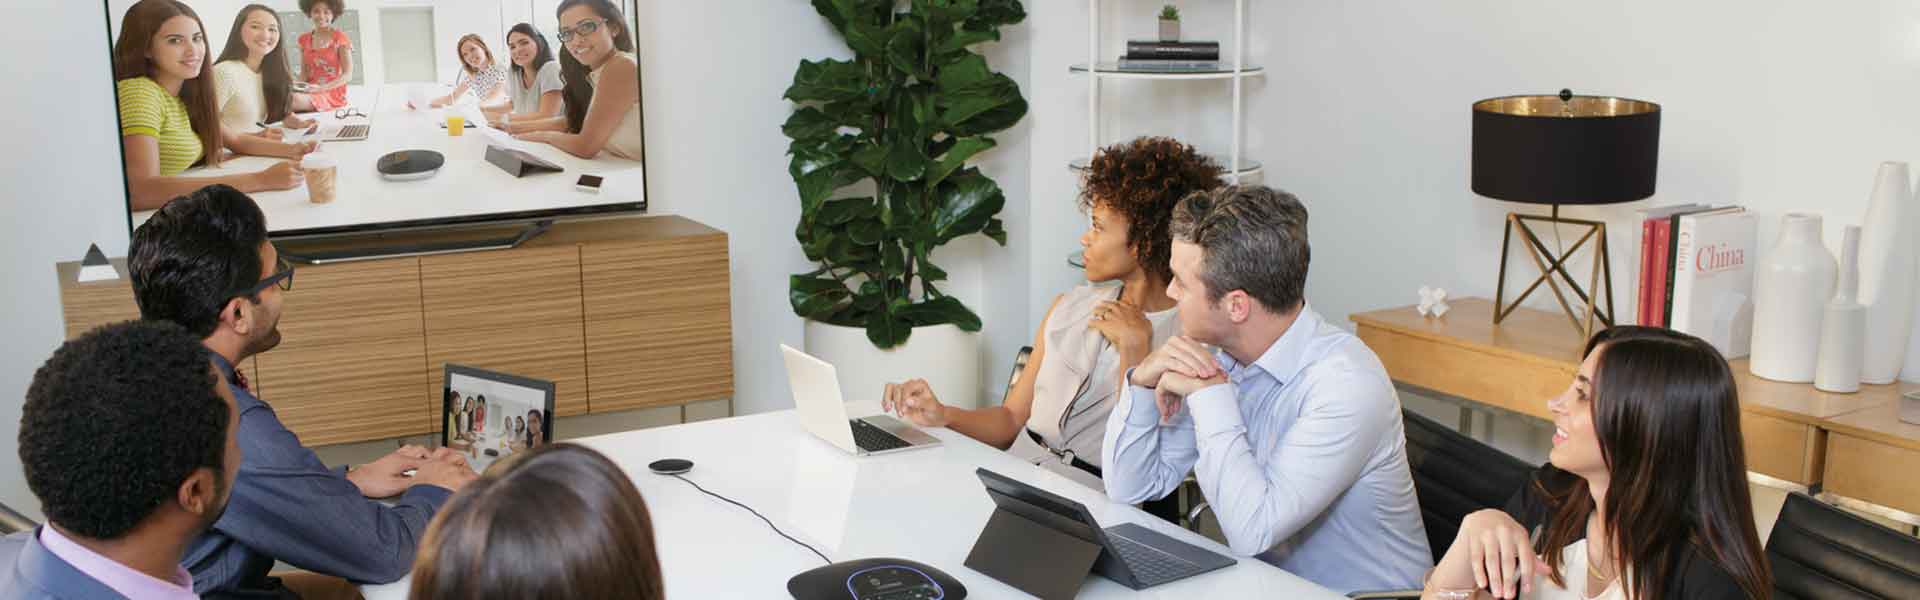 Web-Conferencing-on-FocusEverything